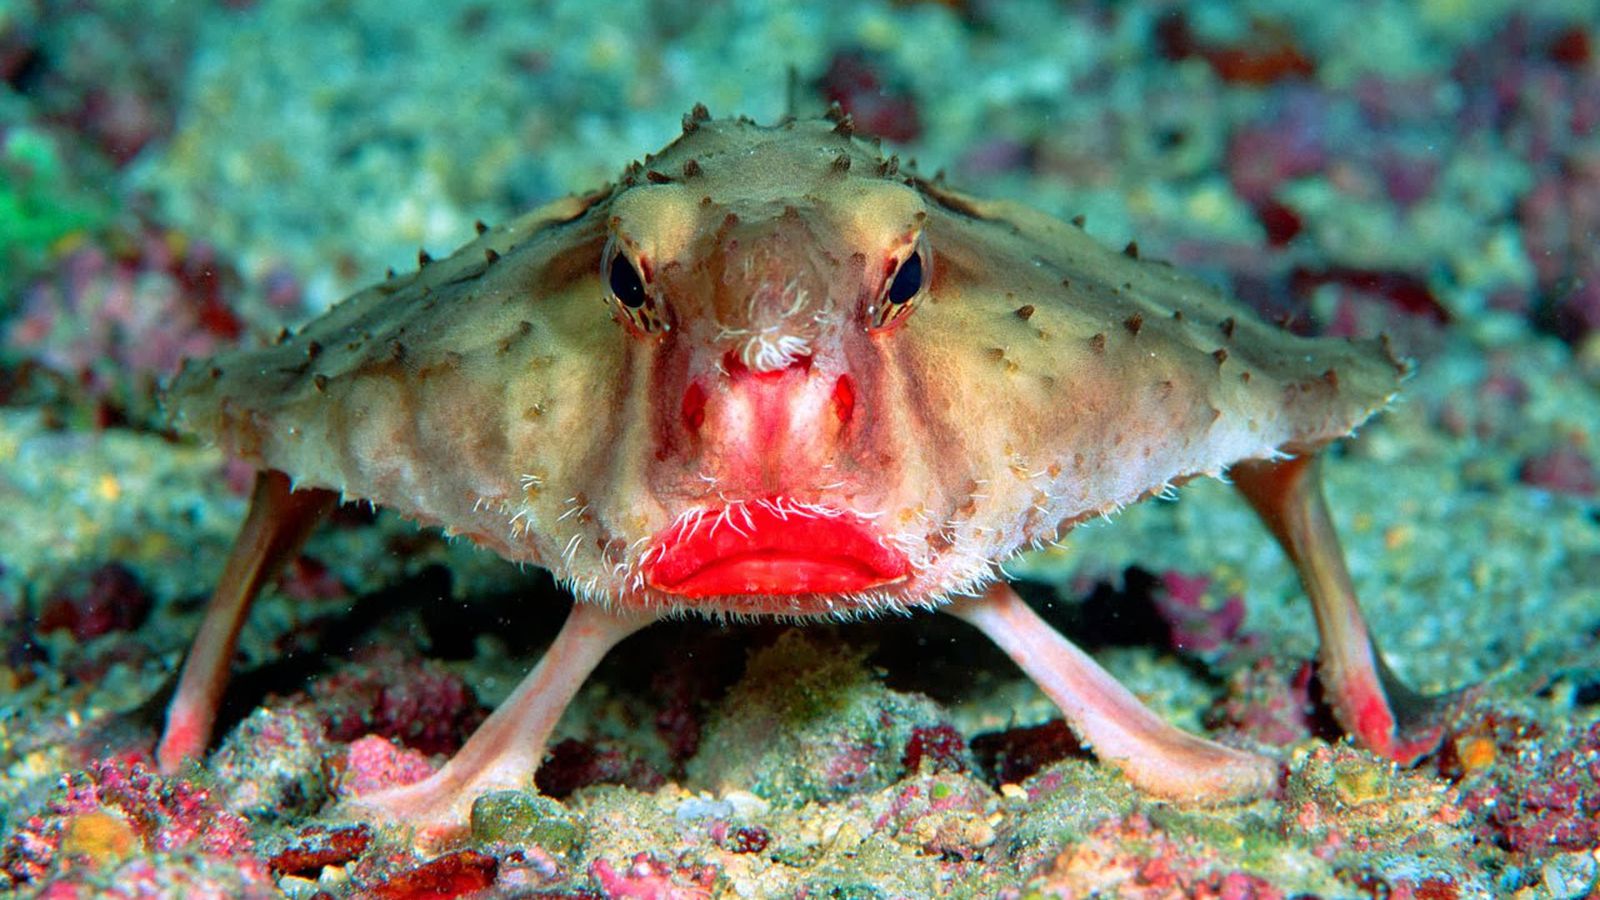 Cool sea animals you rarely see